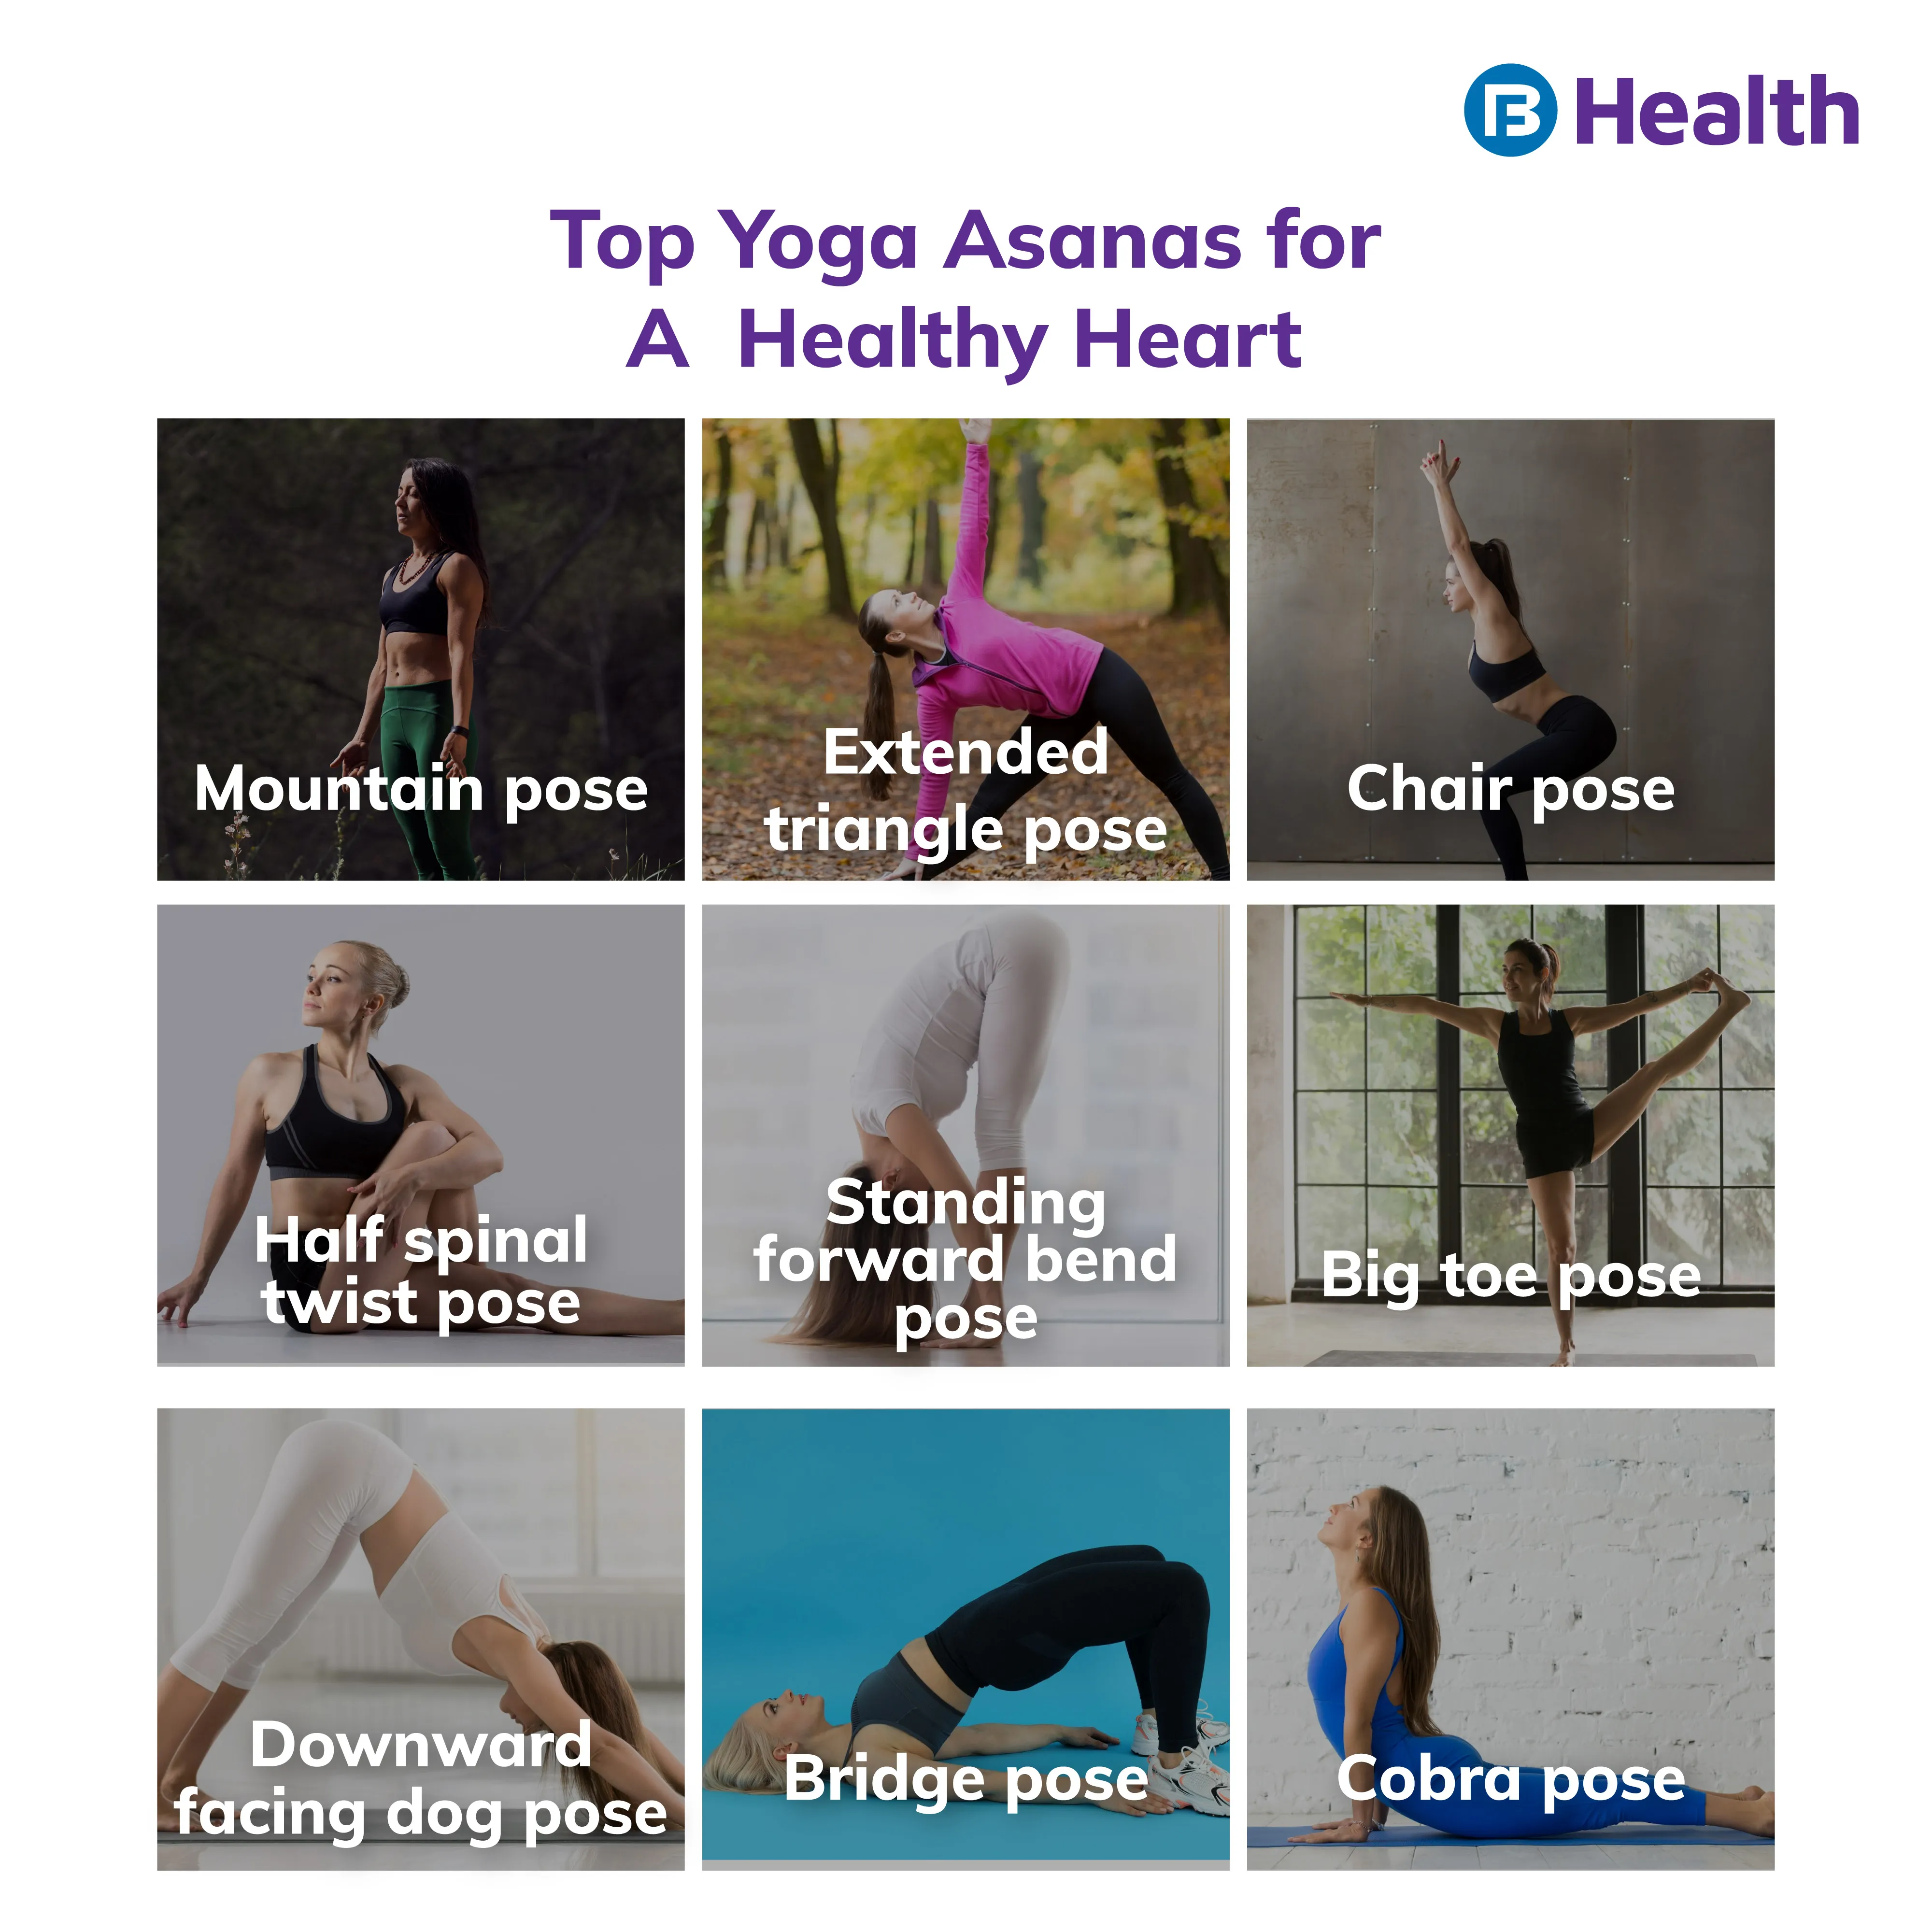 7 yoga poses for healthy heart to practice daily